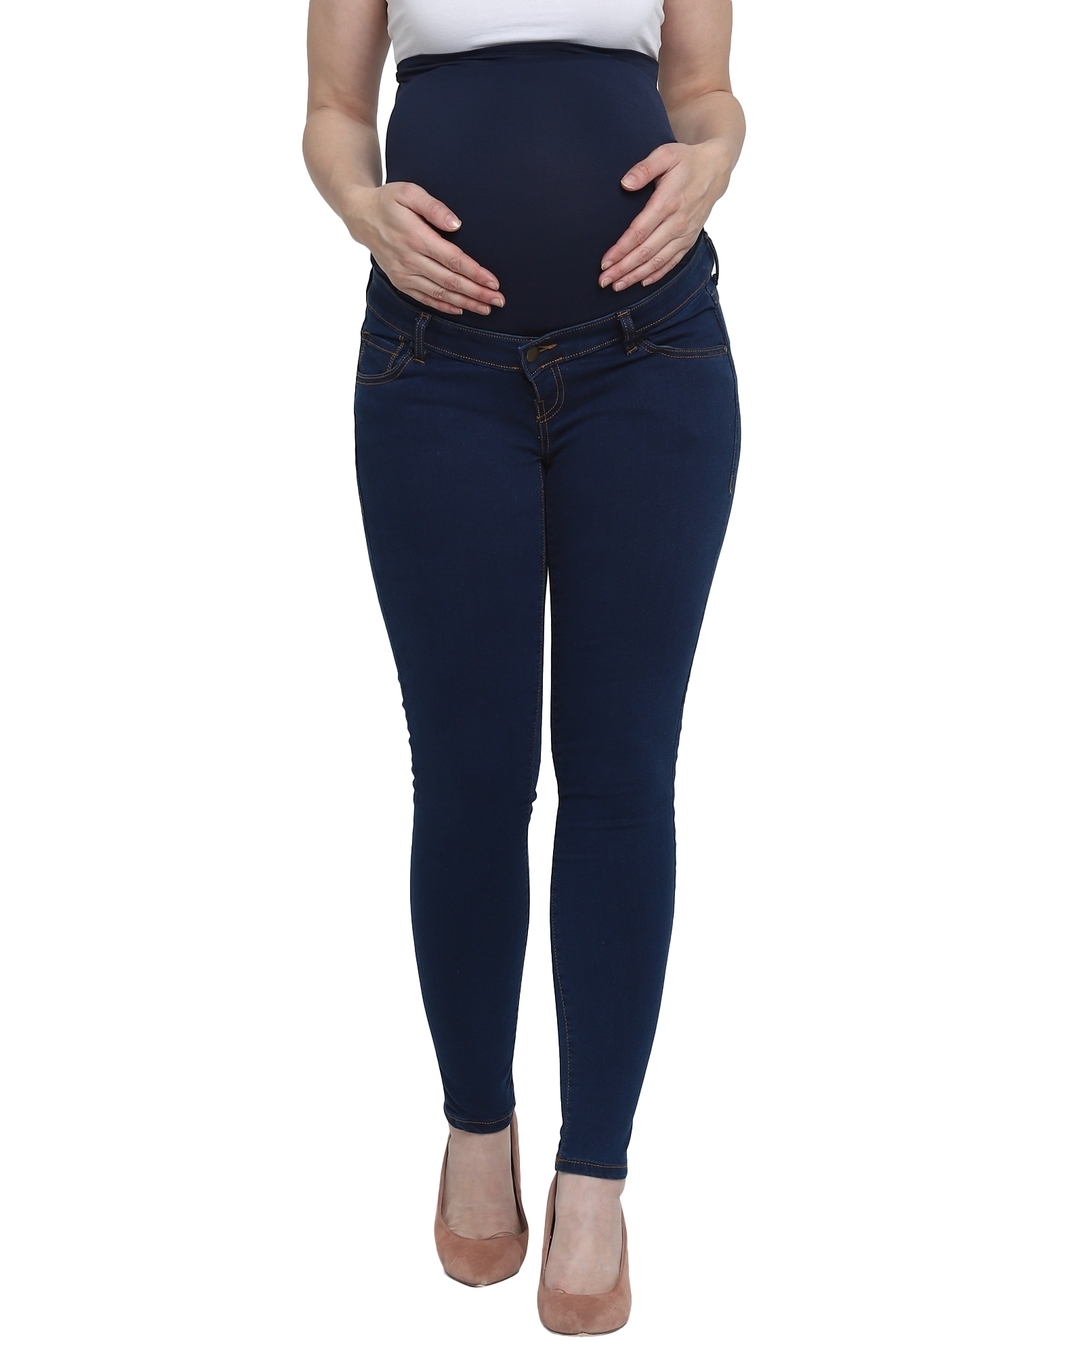 Maternity Jeans - Top Picks for Fall/Winter 23/24